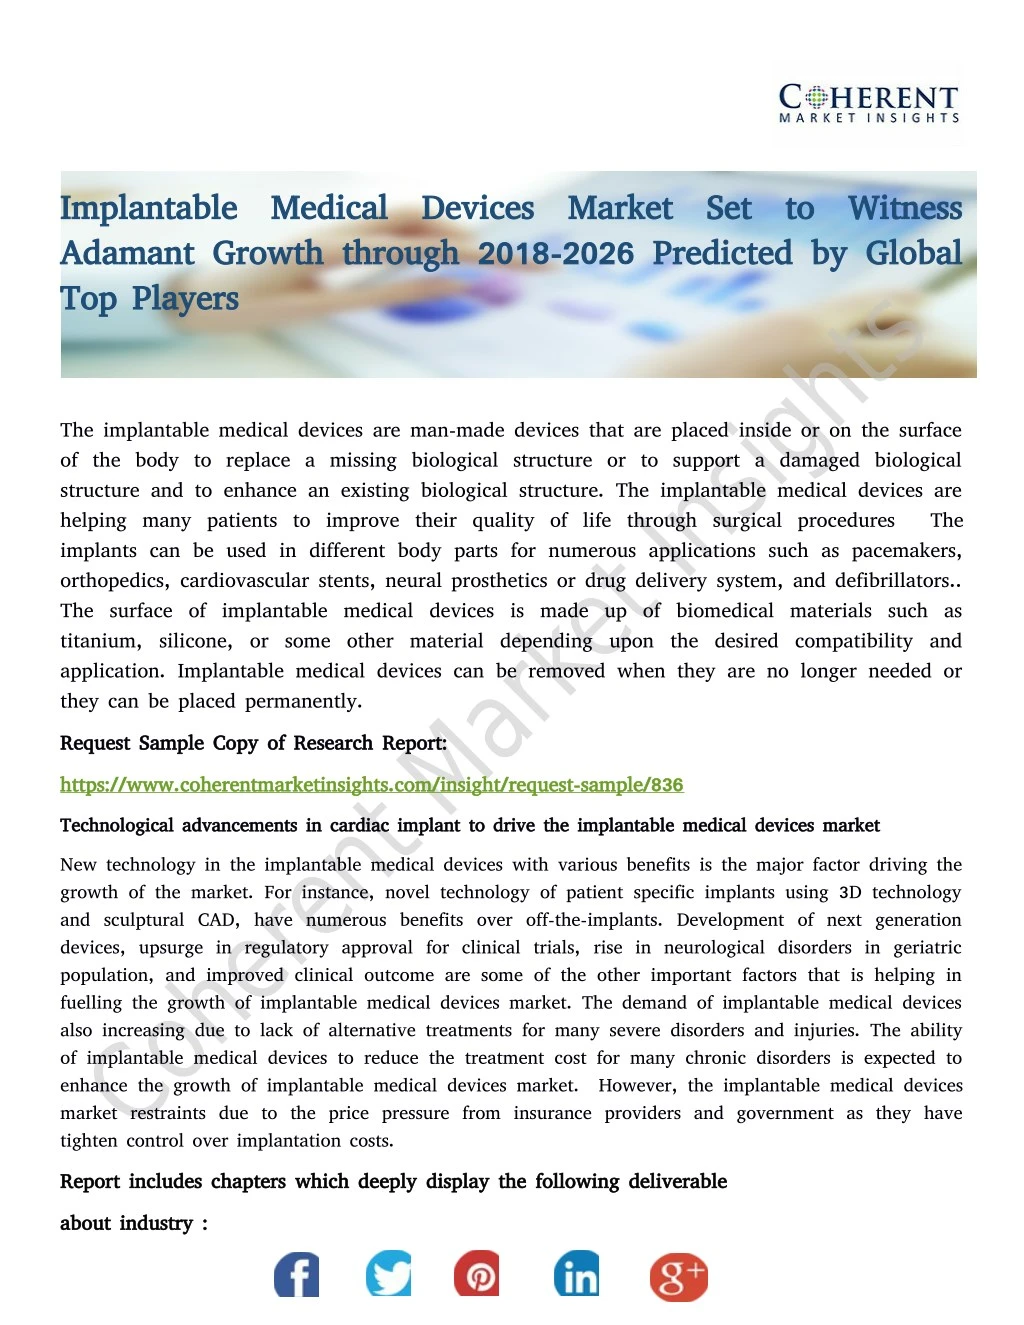 implantable medical devices market set to witness